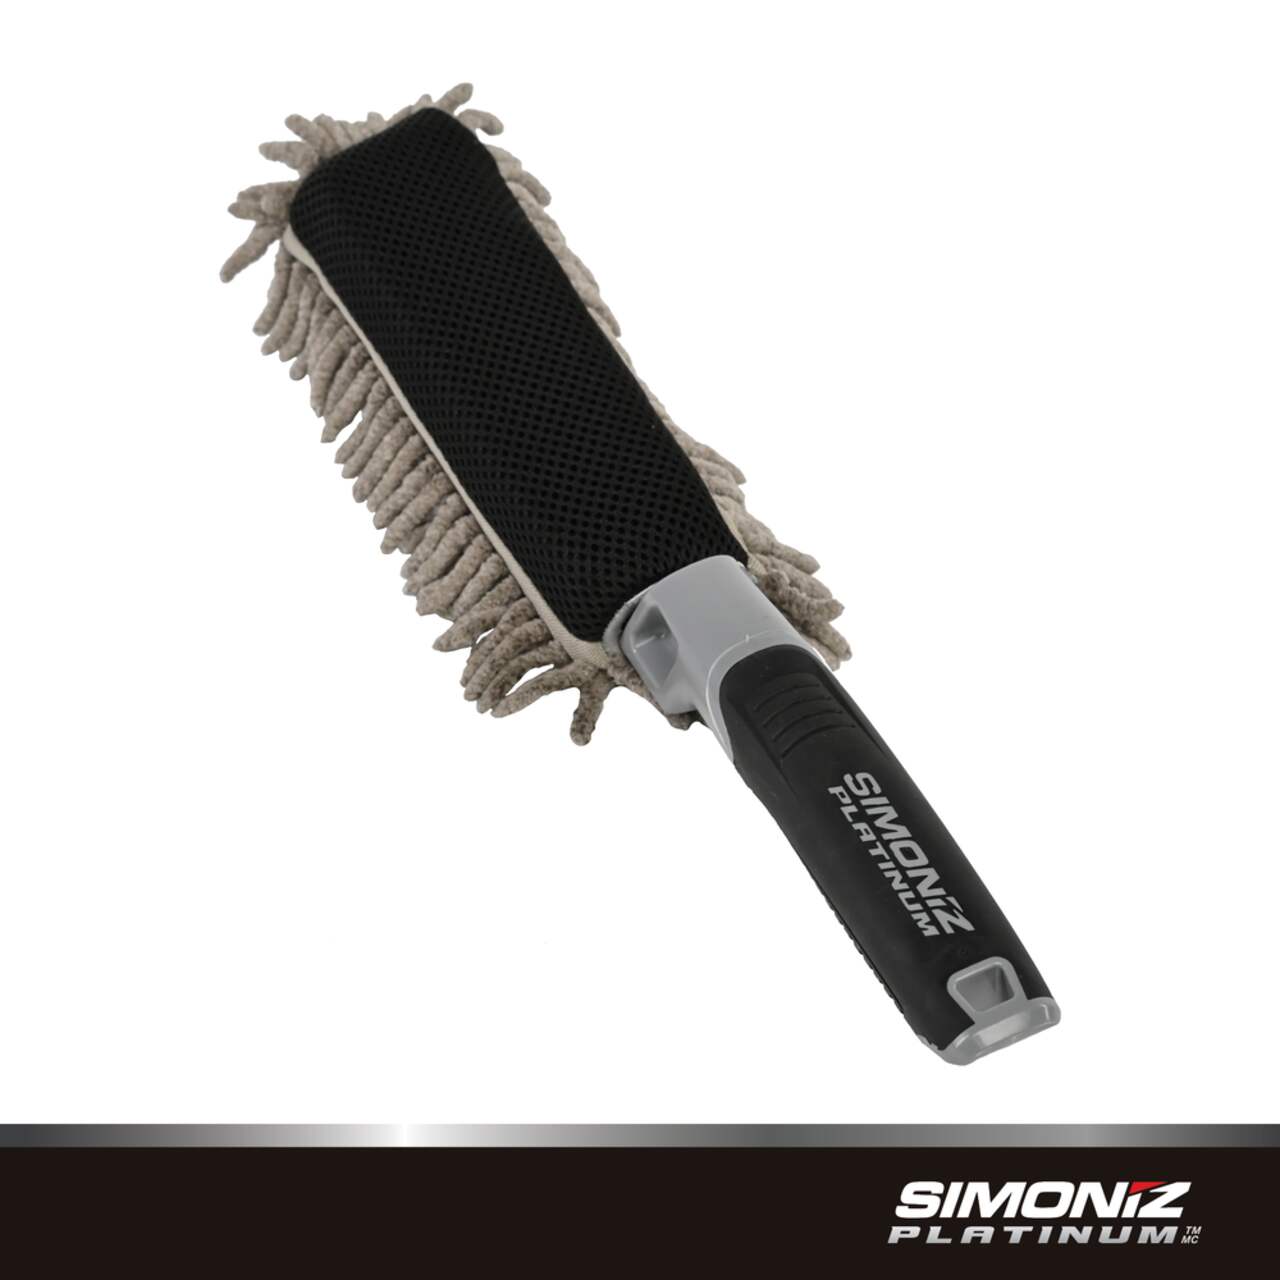 https://media-www.canadiantire.ca/product/automotive/car-care-accessories/auto-cleaning-tools/0396032/simoniz-platinum-bend-and-wash-wheel-cleaning-brush-0c16fe97-a6b3-466a-b051-7eb3155a6477.png?imdensity=1&imwidth=640&impolicy=mZoom